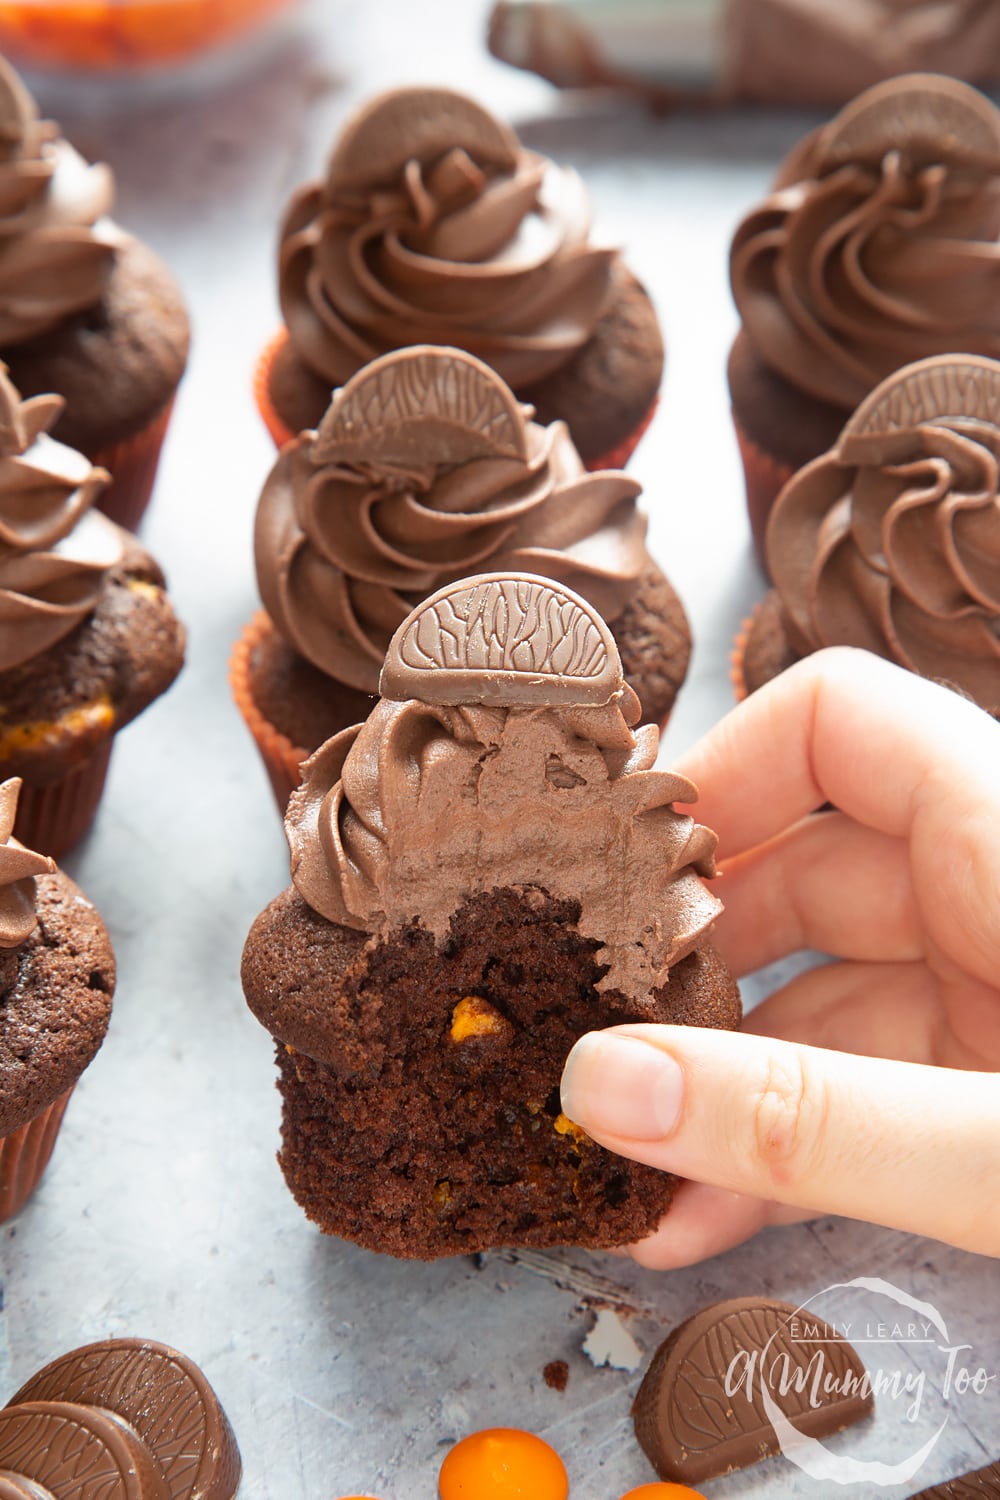 Front angle shot of a hand holding a chocolate orange muffin with a mummy too logo in the lower-right corner